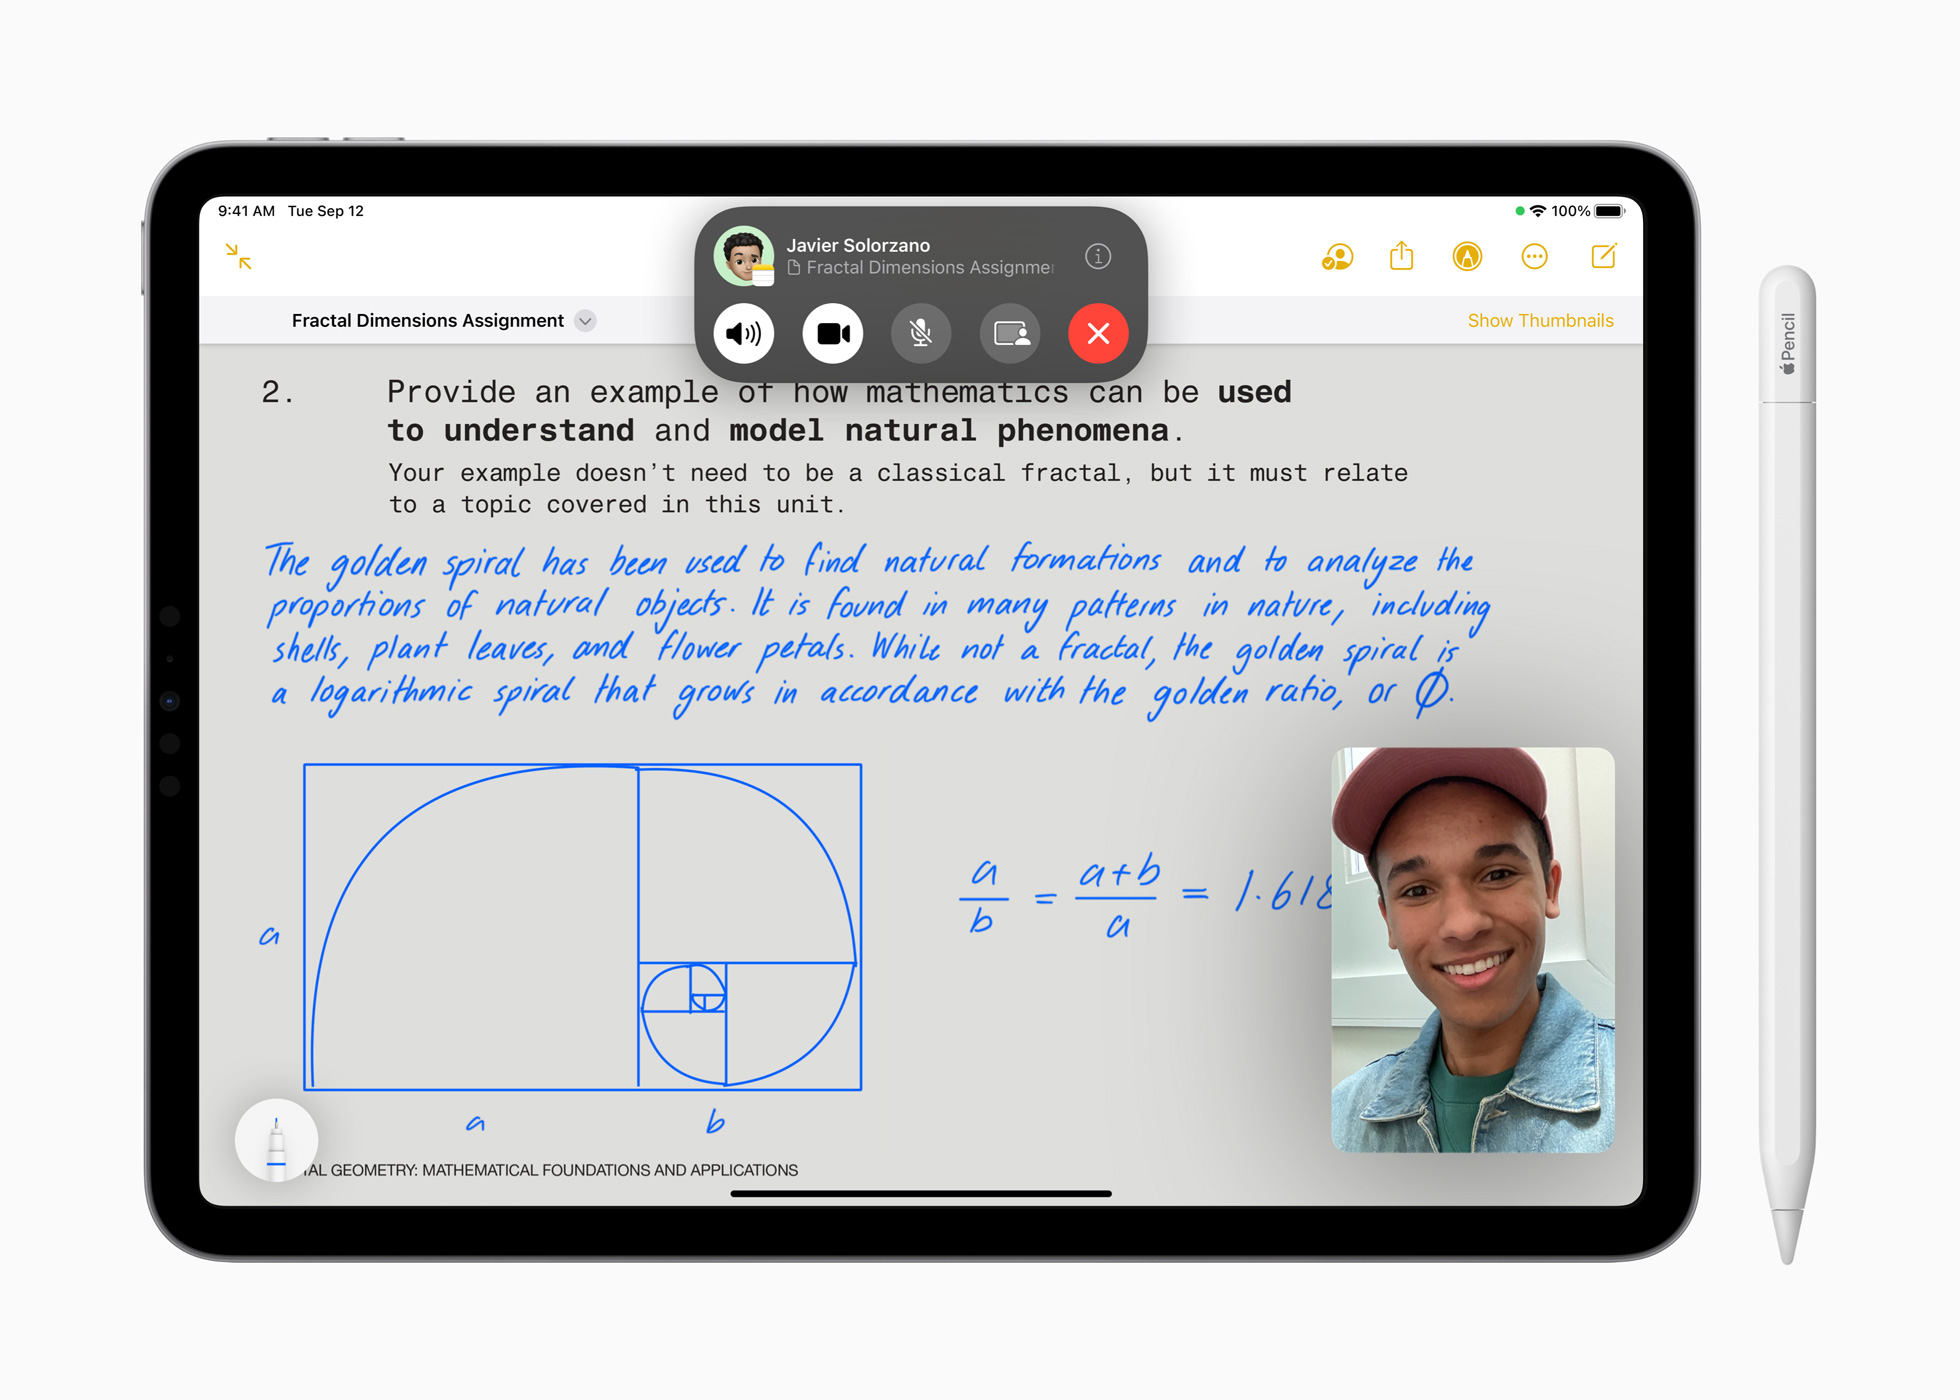 How to take notes on your iPad with an Apple Pencil - Video